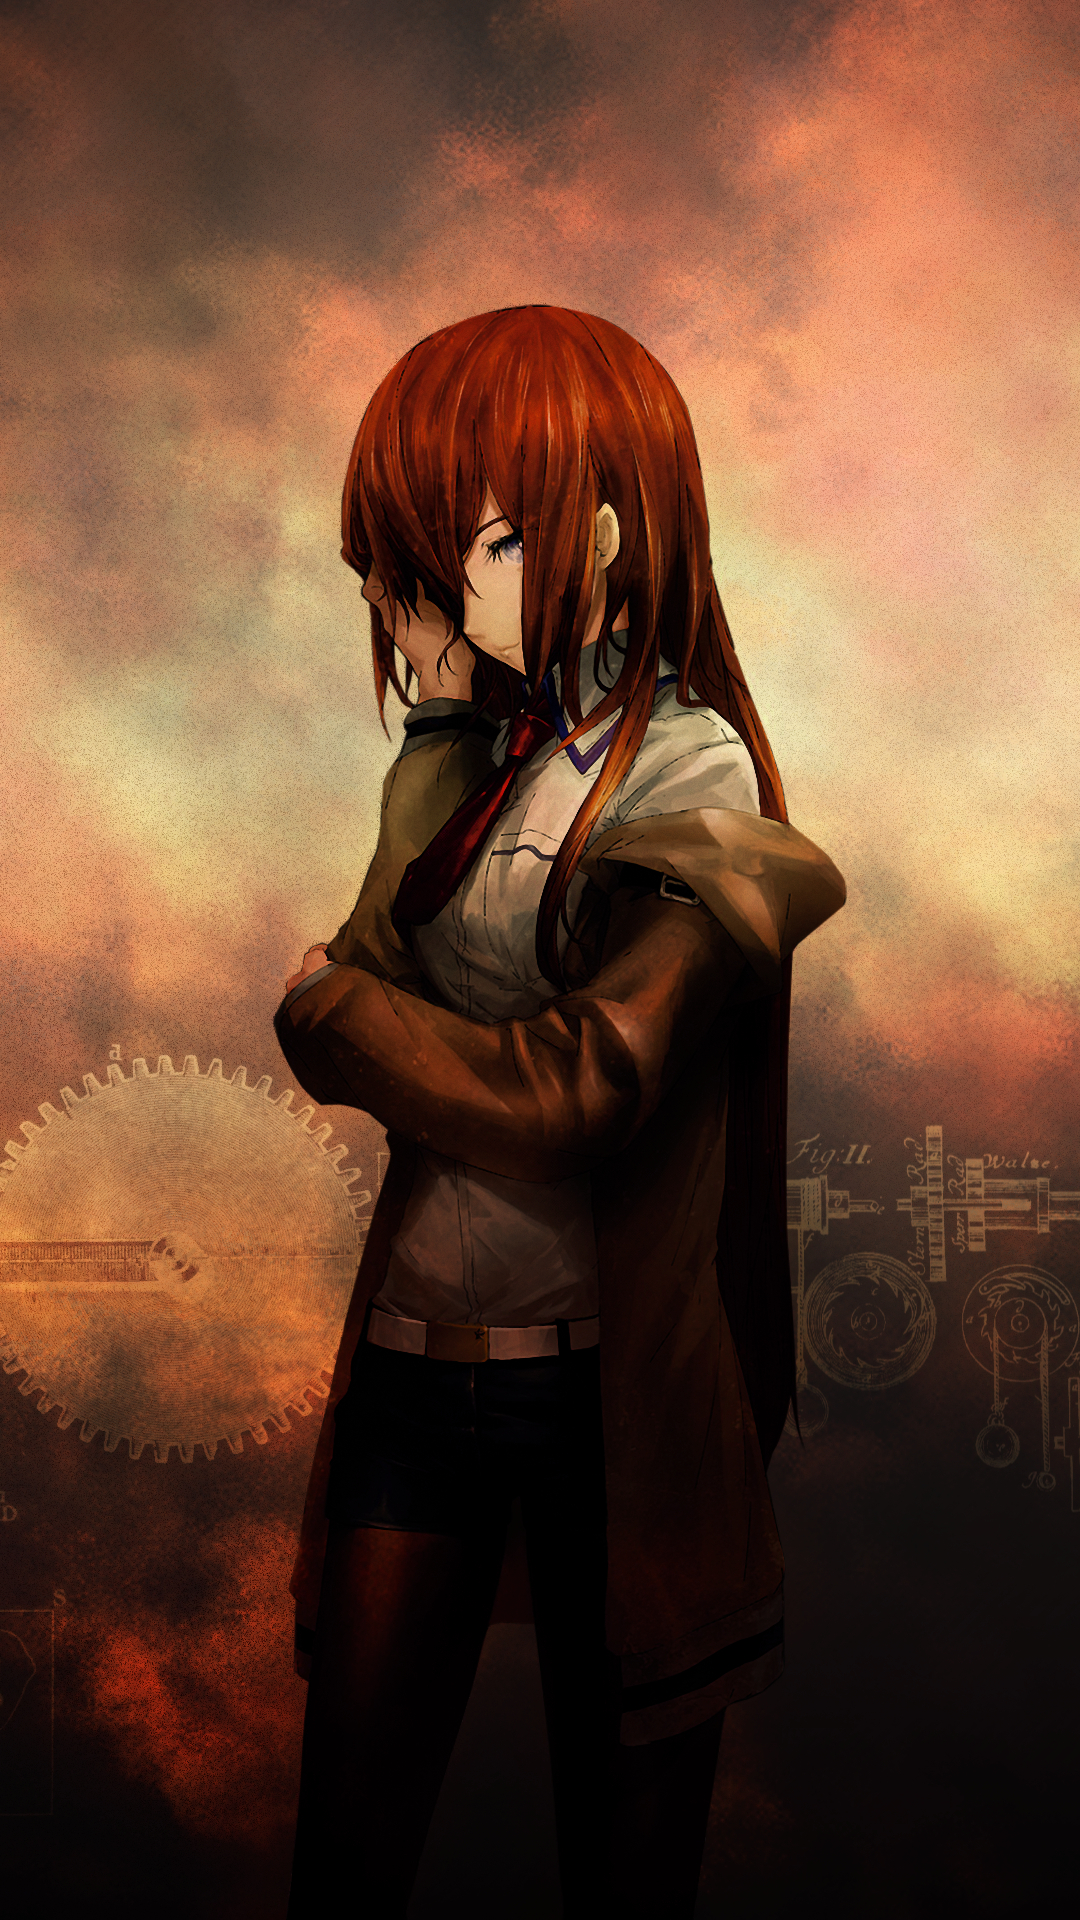 1080x1920 Steins Gate Phone Wallpapers Top Free Steins Gate Phone Backgrounds